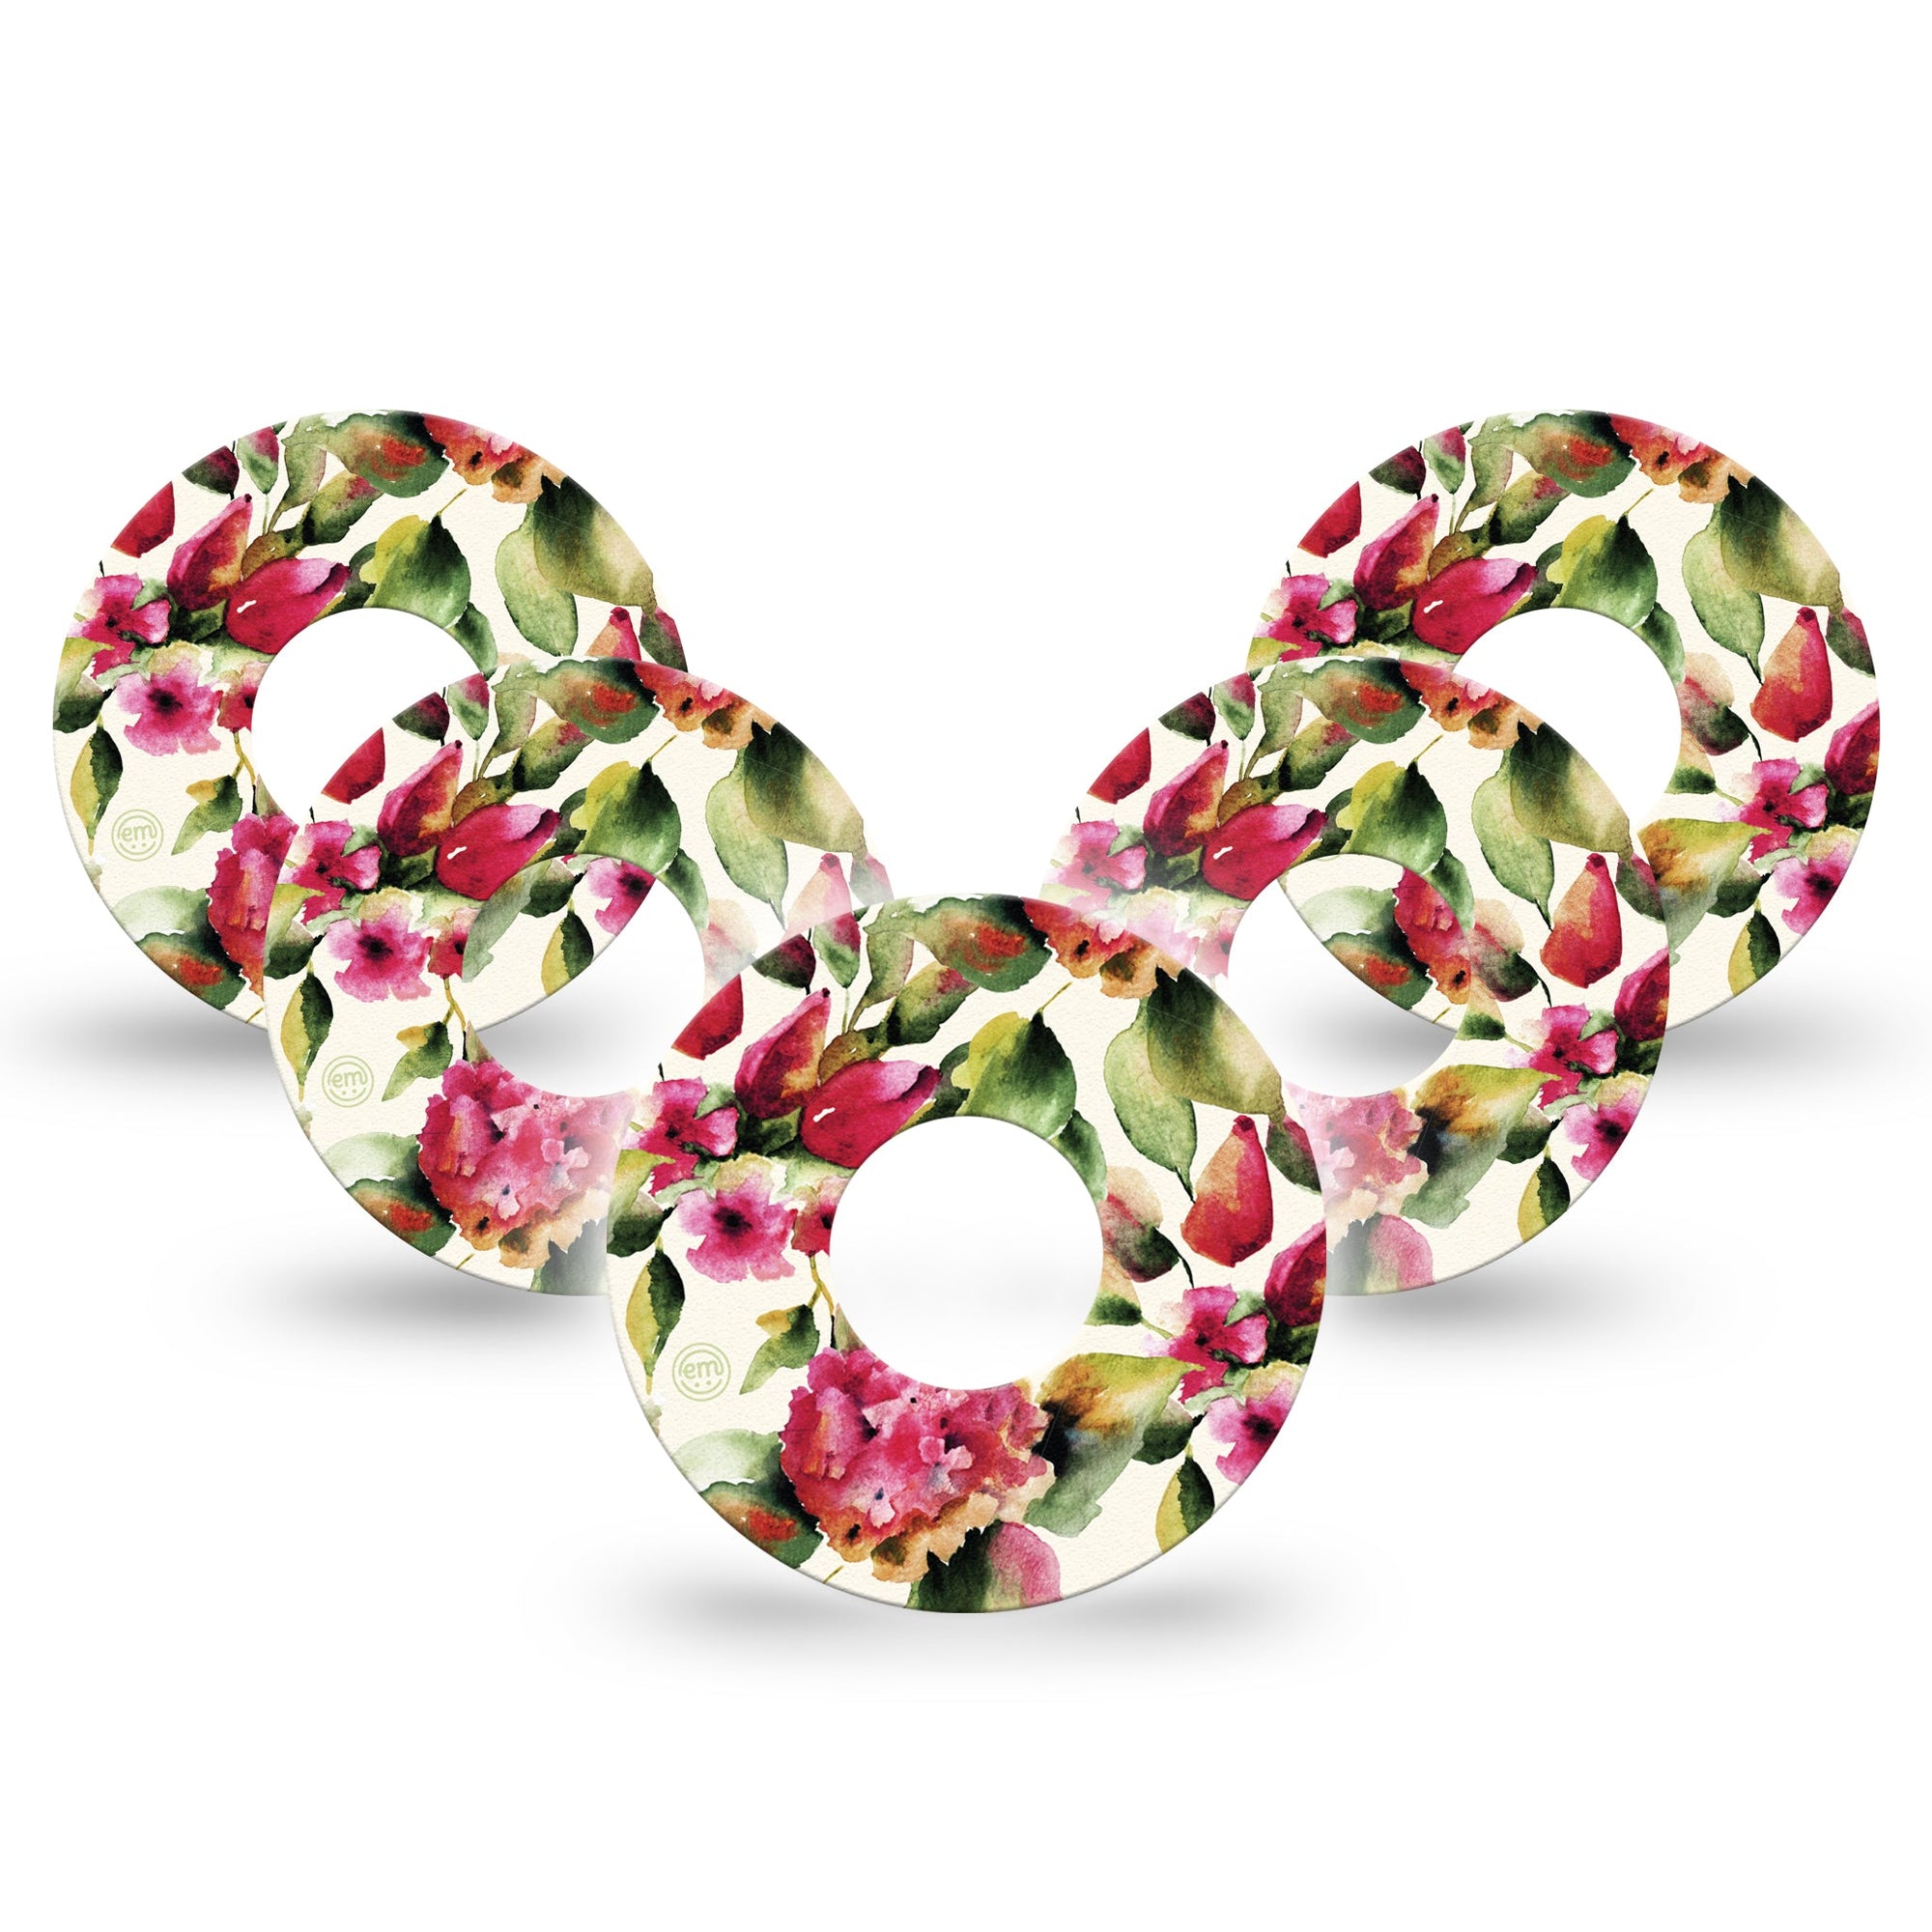 ExpressionMed Floral Romance Infusion Tape 10-pack Gloomy Florals, CGM Adhesive Patch Design